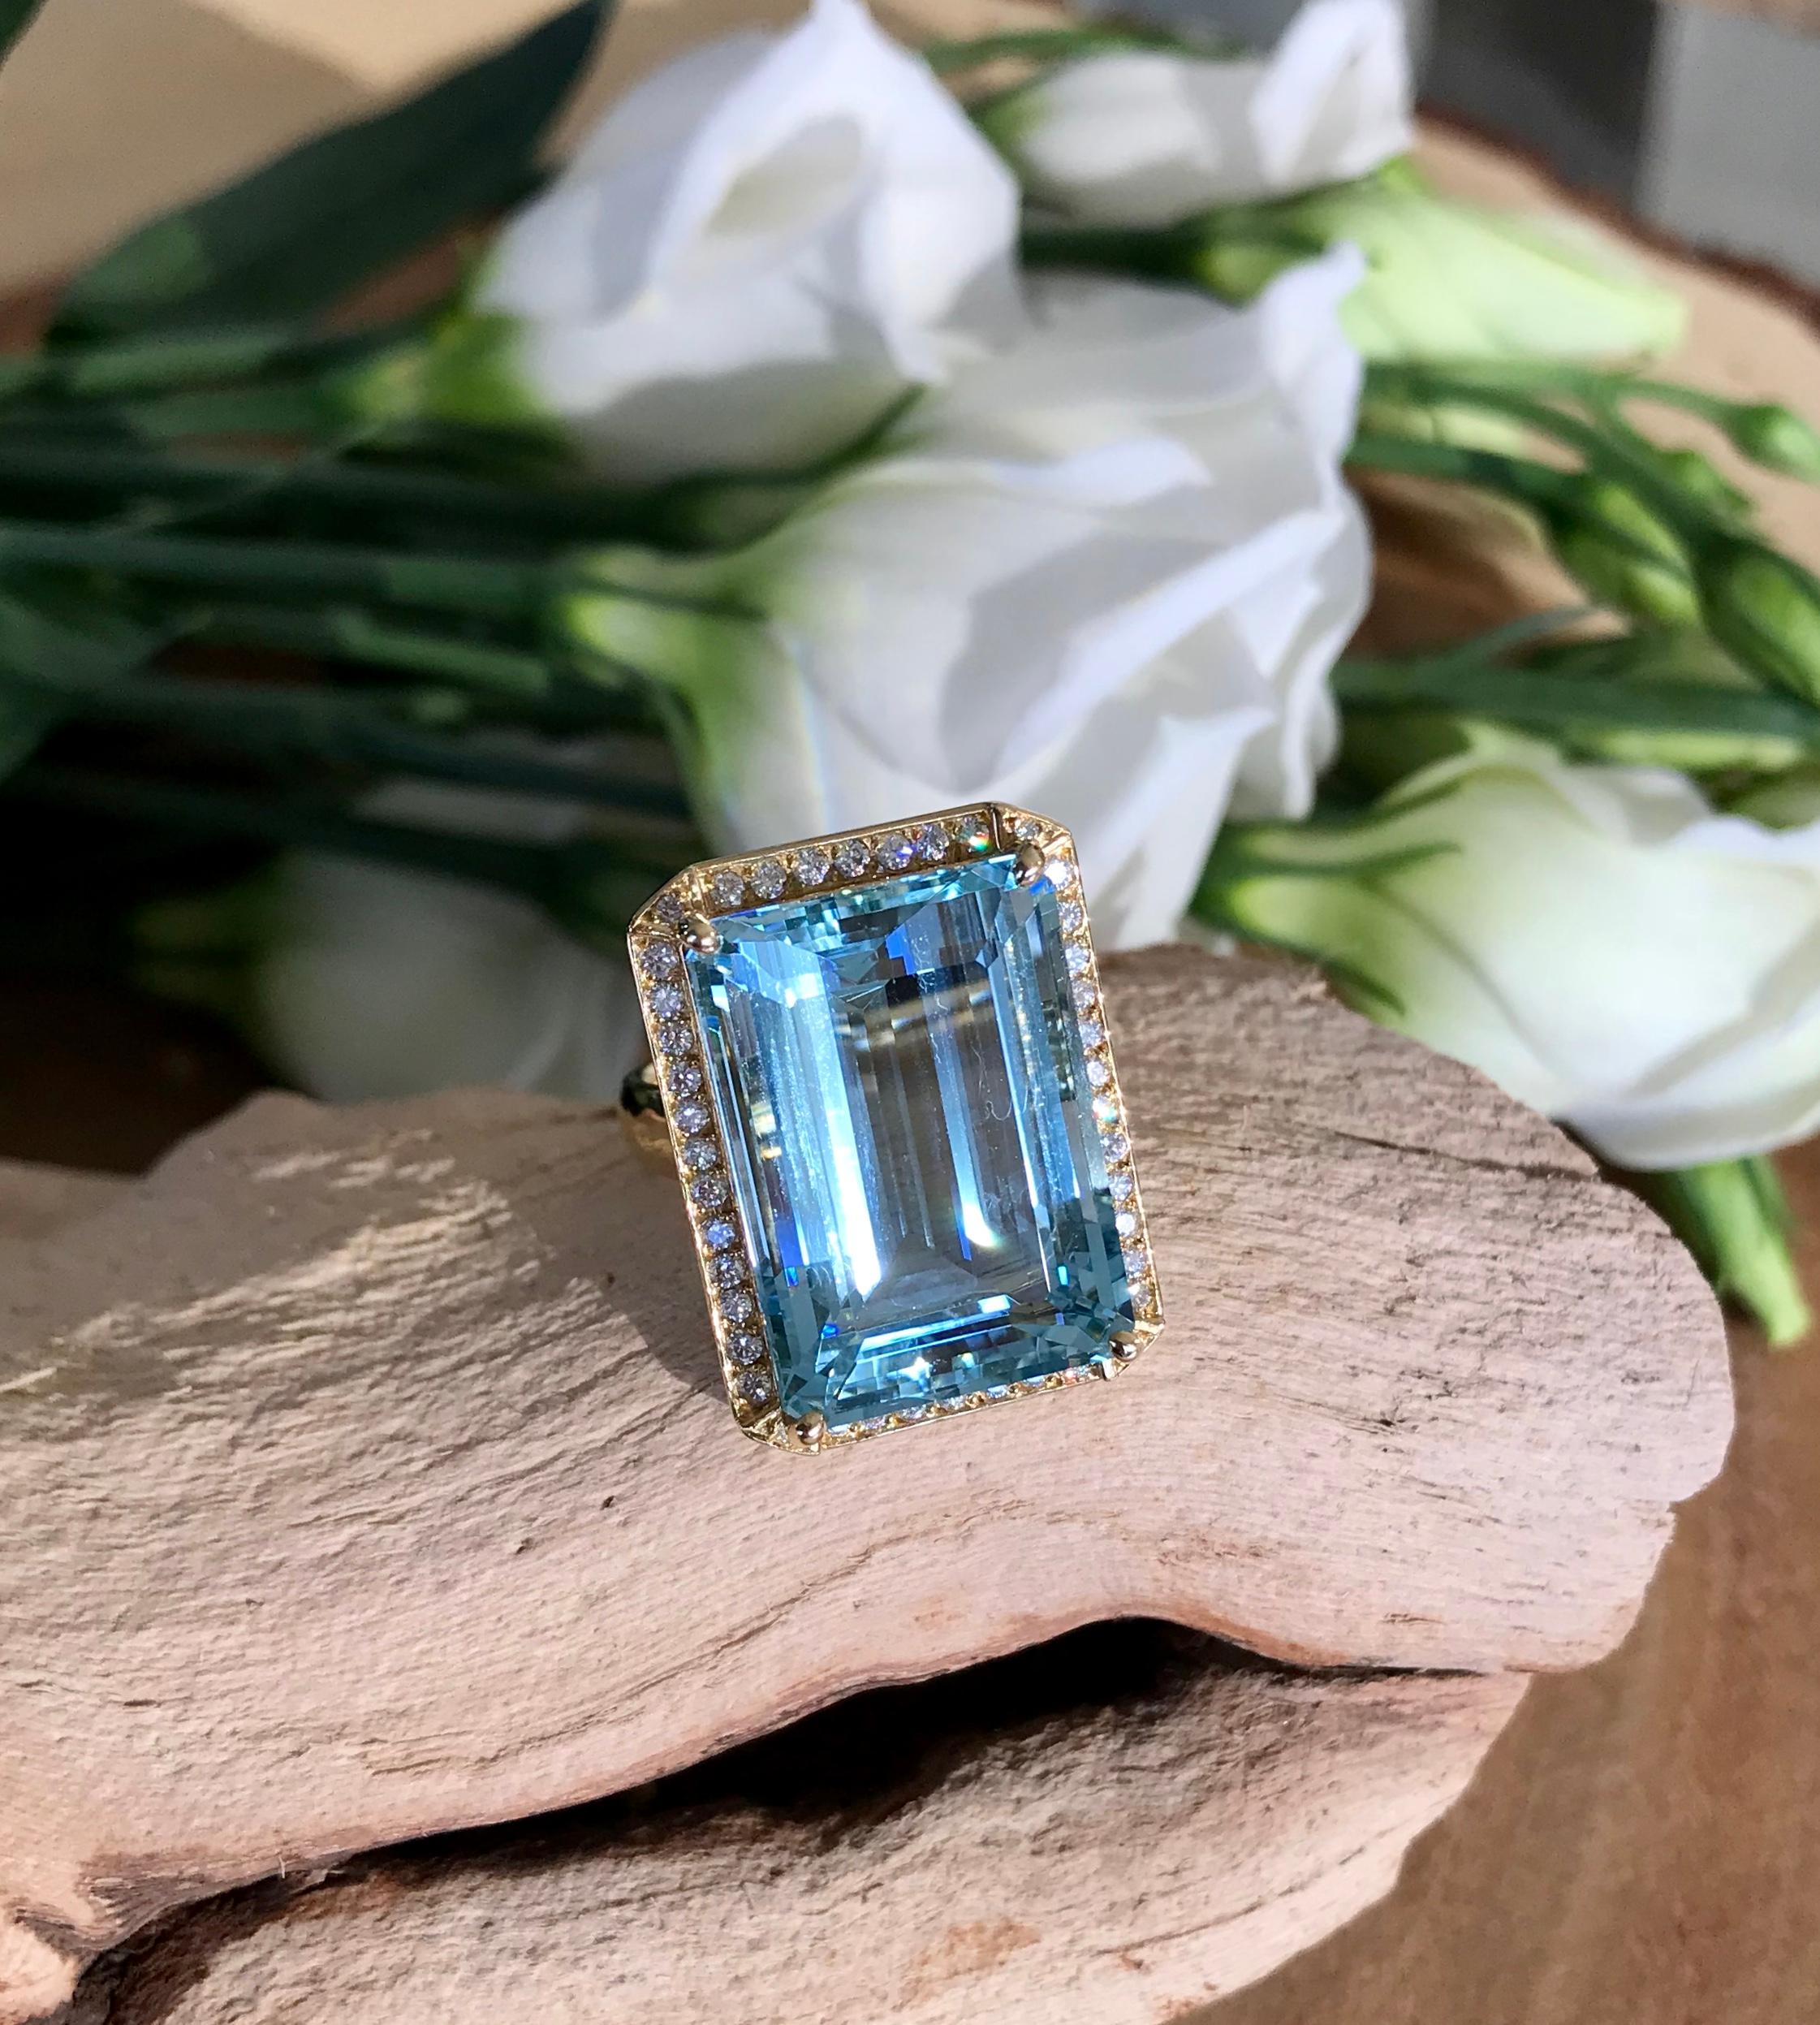 A one-of-a-kind cocktail ring of 19 carats of emerald-cut aquamarine and diamonds, handcrafted in 18 karat yellow gold.

This stunning, substantial Joon Han aquamarine ring is a true statement piece, with 19 carats of a beautiful emerald-cut